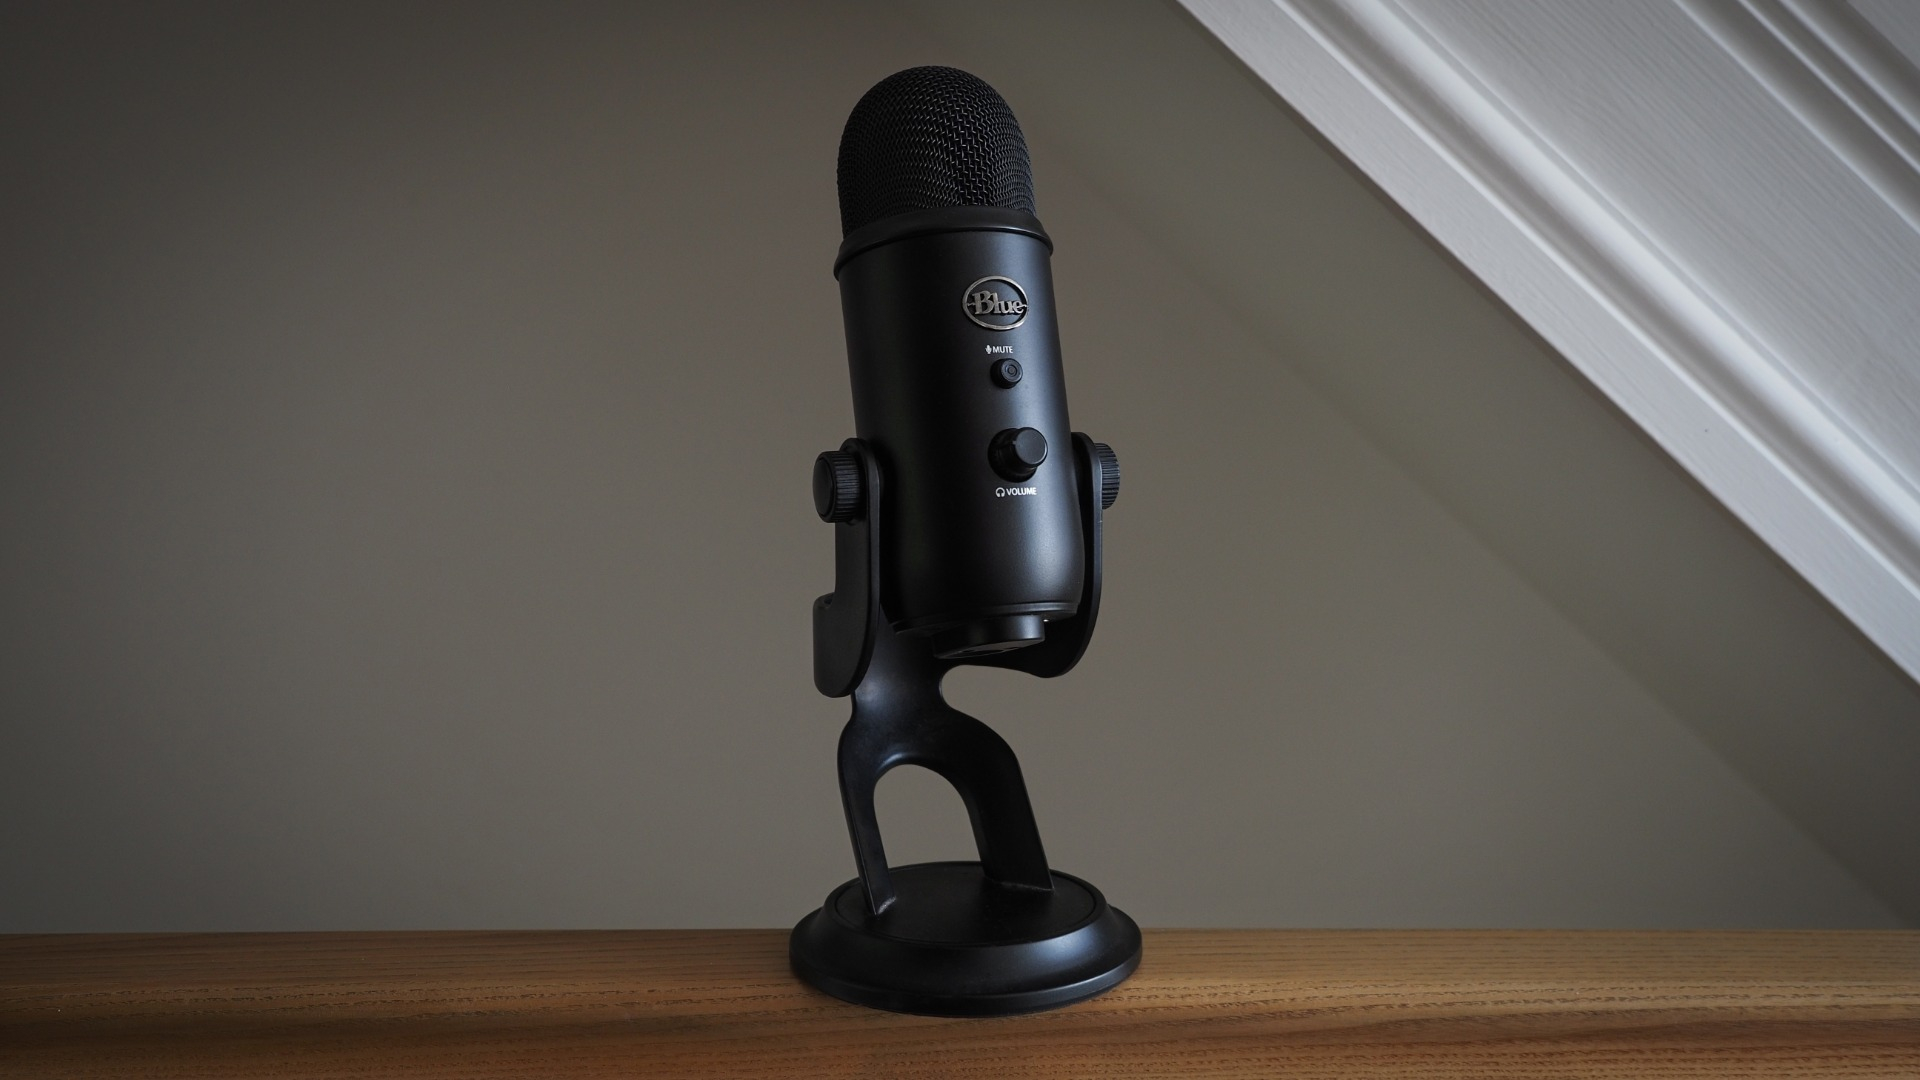 https://www.theloadout.com/wp-content/sites/theloadout/2023/05/Blue-yeti.jpg